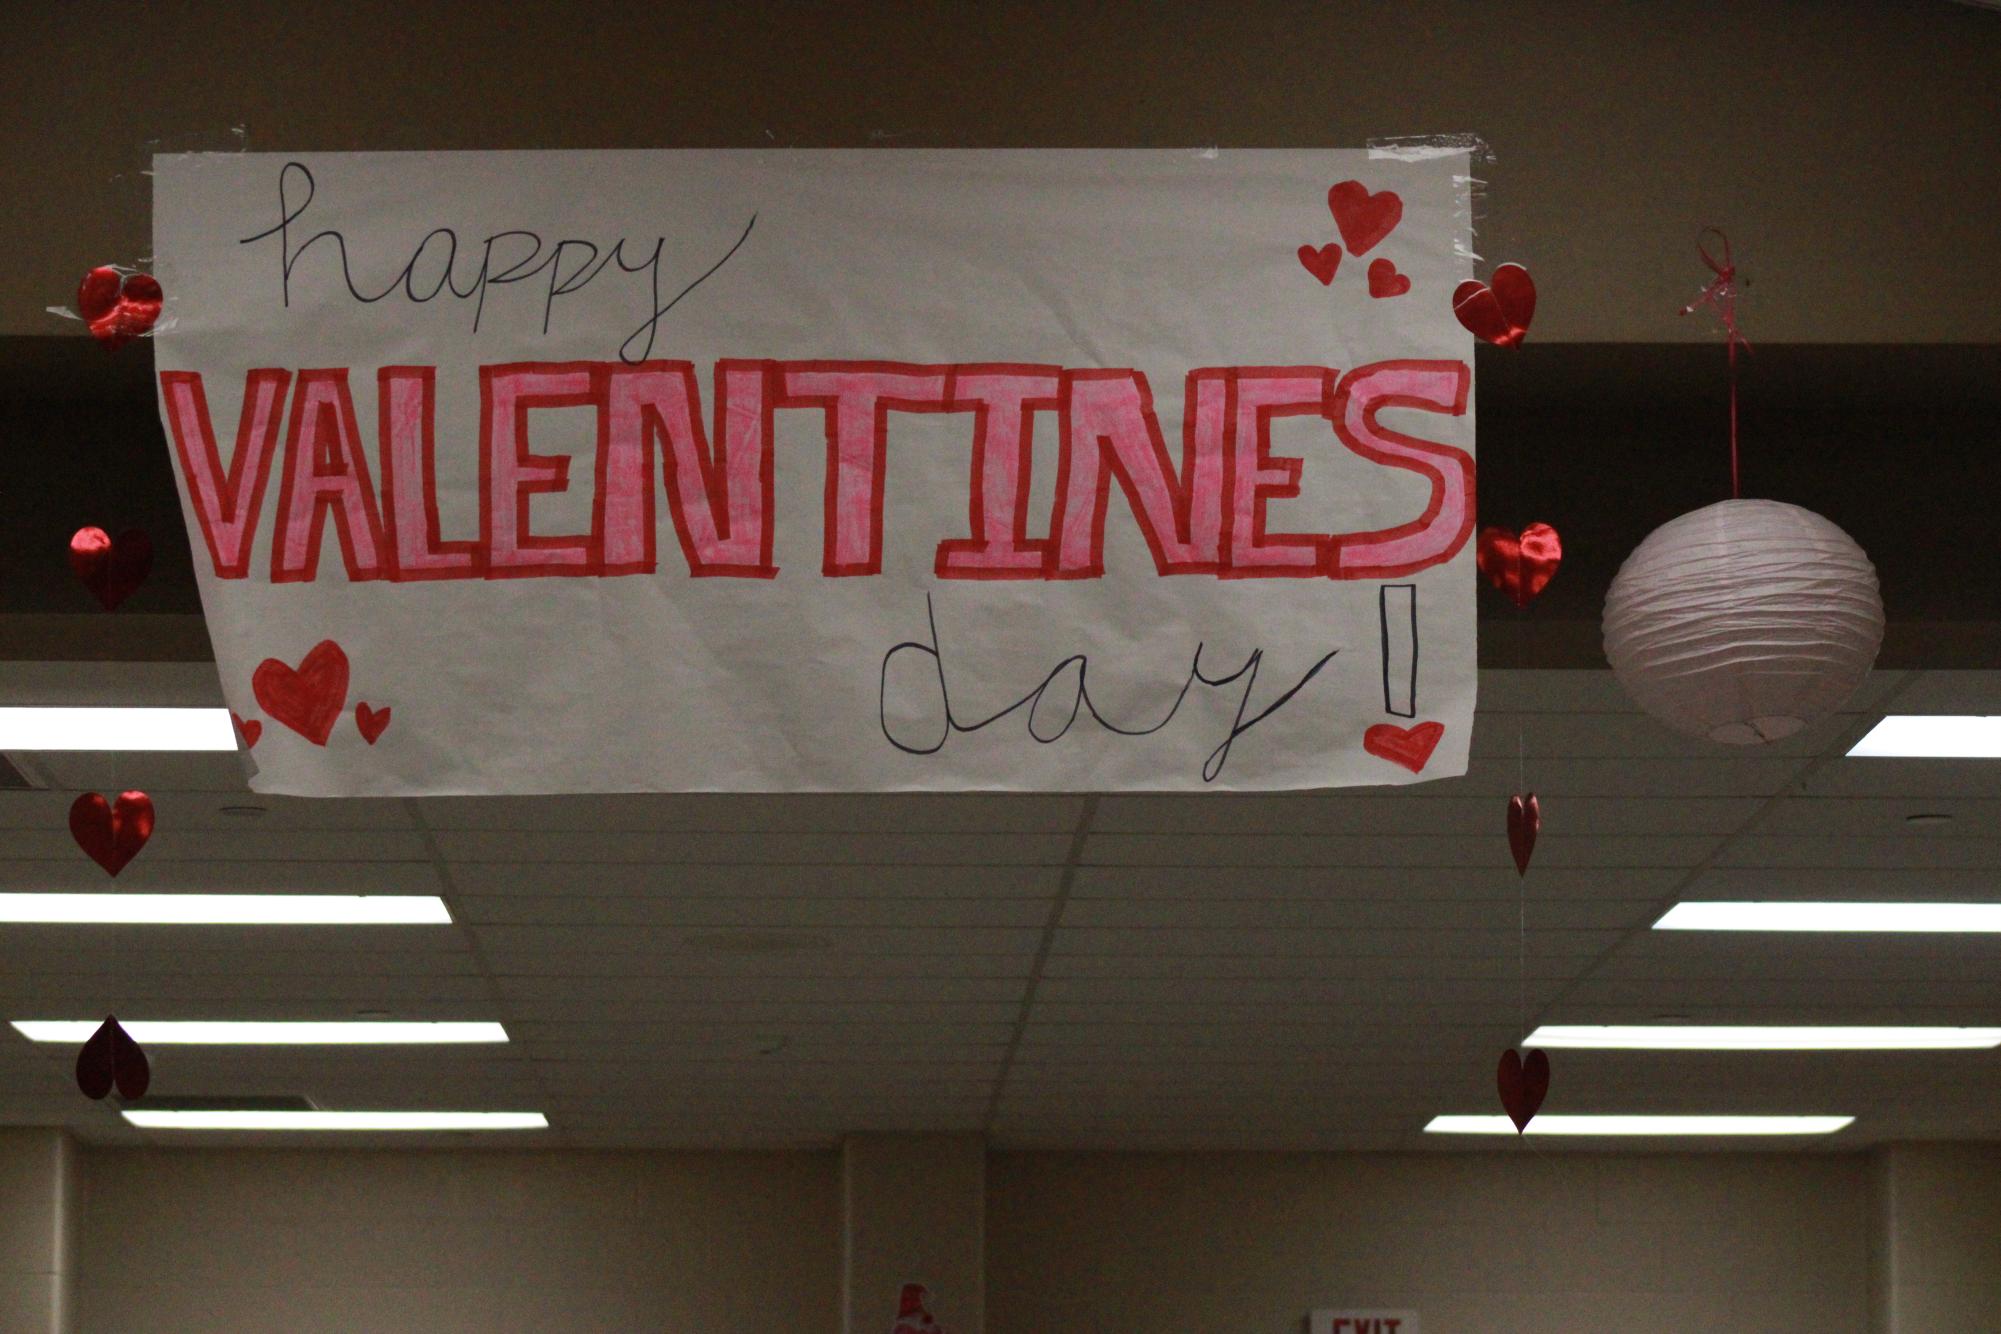 Carterville High School puts a banner up for the Valentines Day banquet.